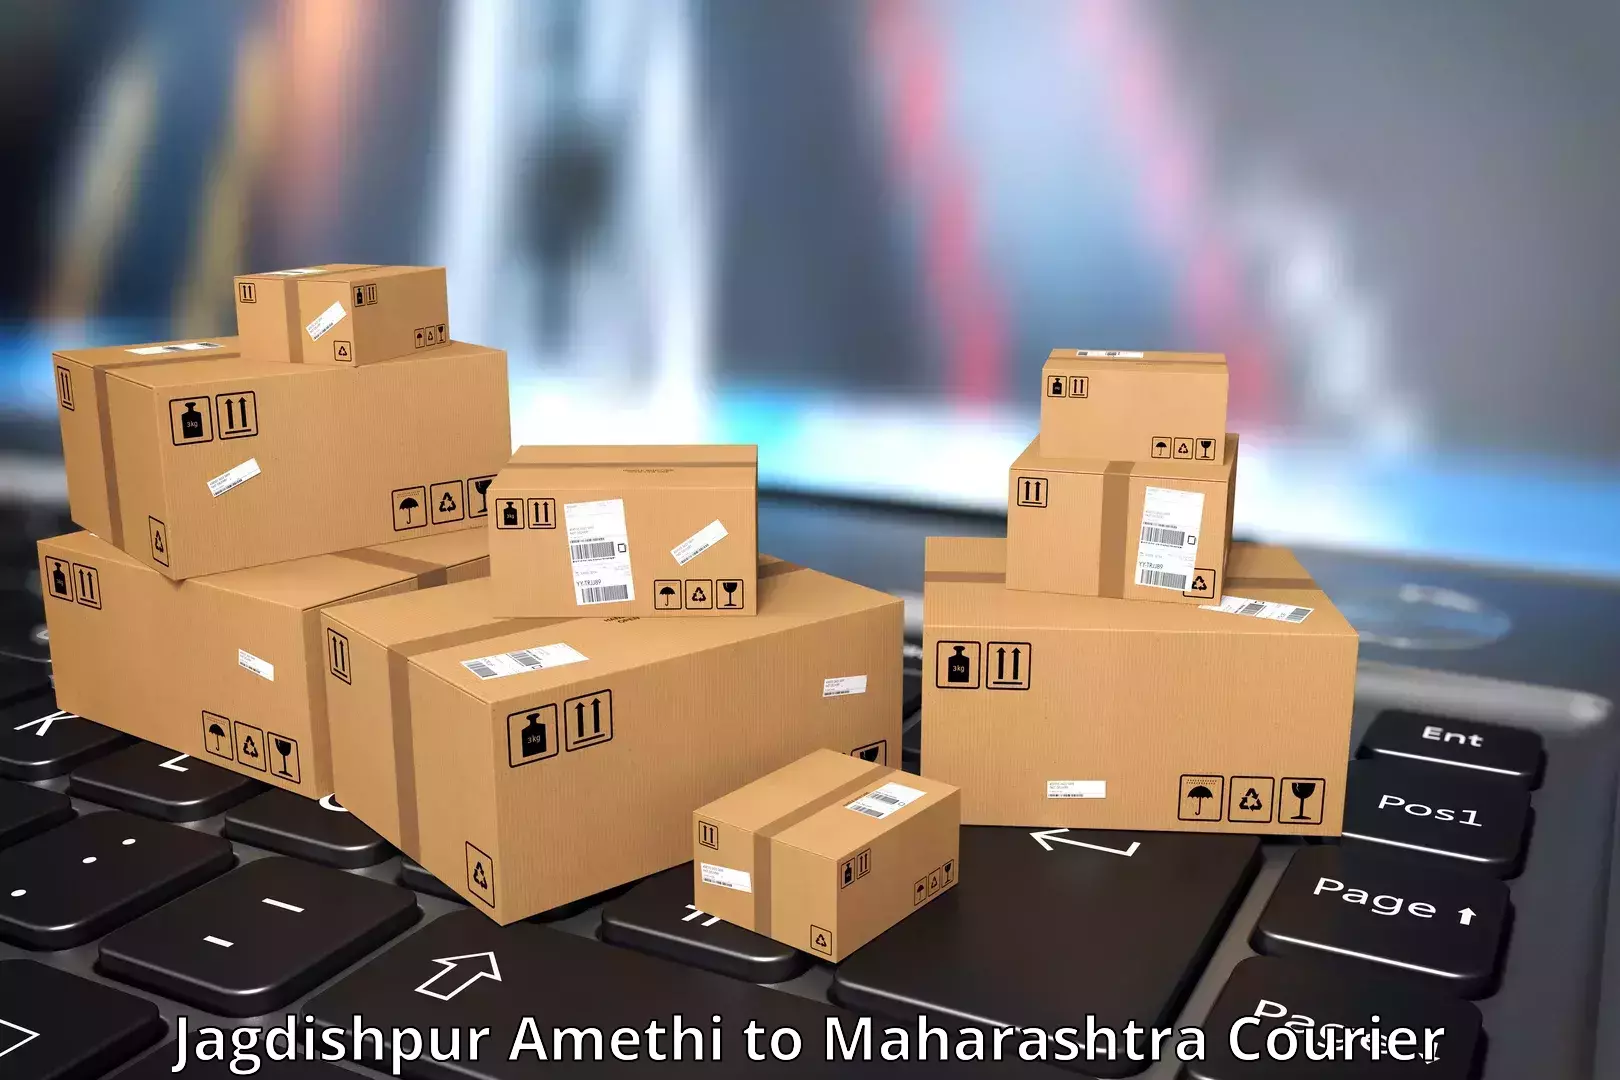 Dynamic courier operations Jagdishpur Amethi to SVKMs Narsee Monjee Institute of Management Studies Mumbai